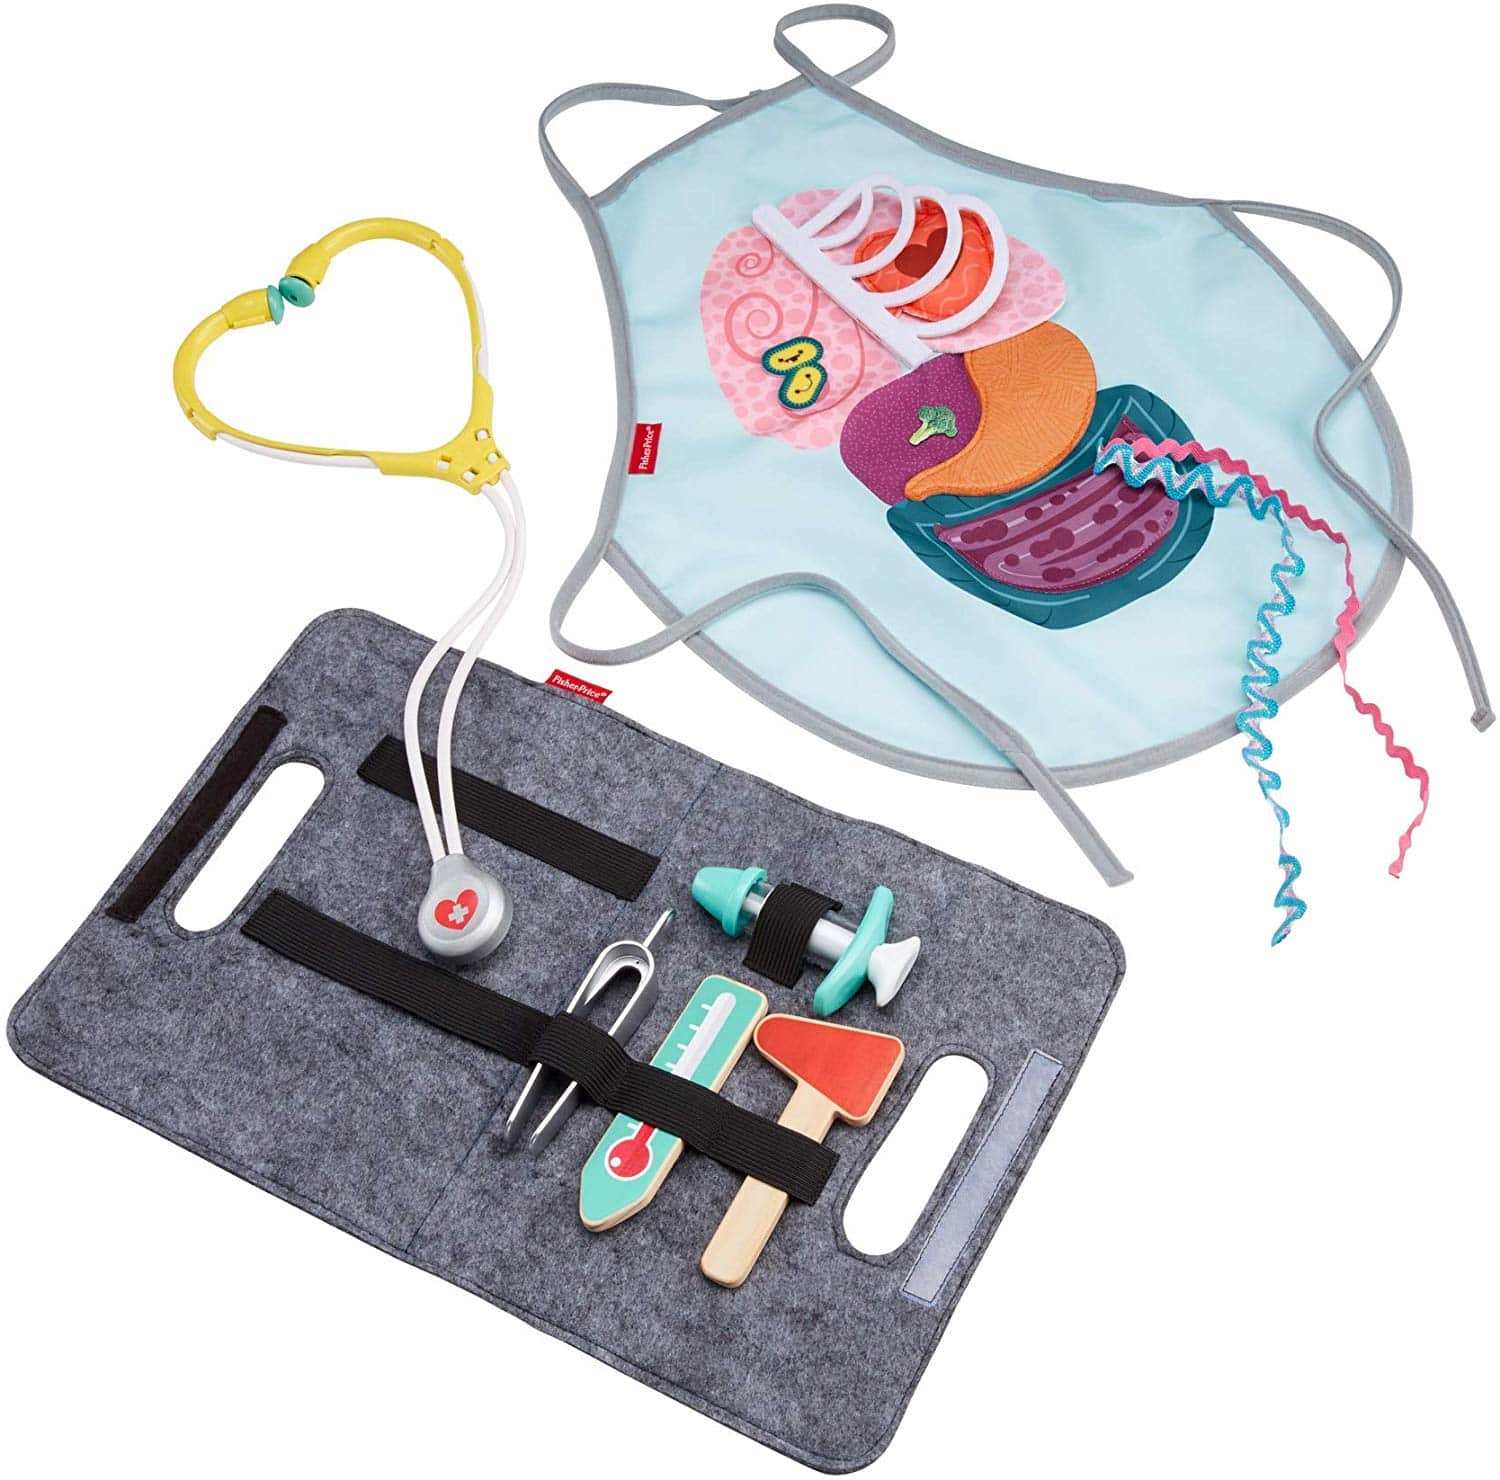 Fisher-Price Patient and Doctor Kit – 9-Piece Medical Pretend Play Gift Set $9.99 (REG $24.99)